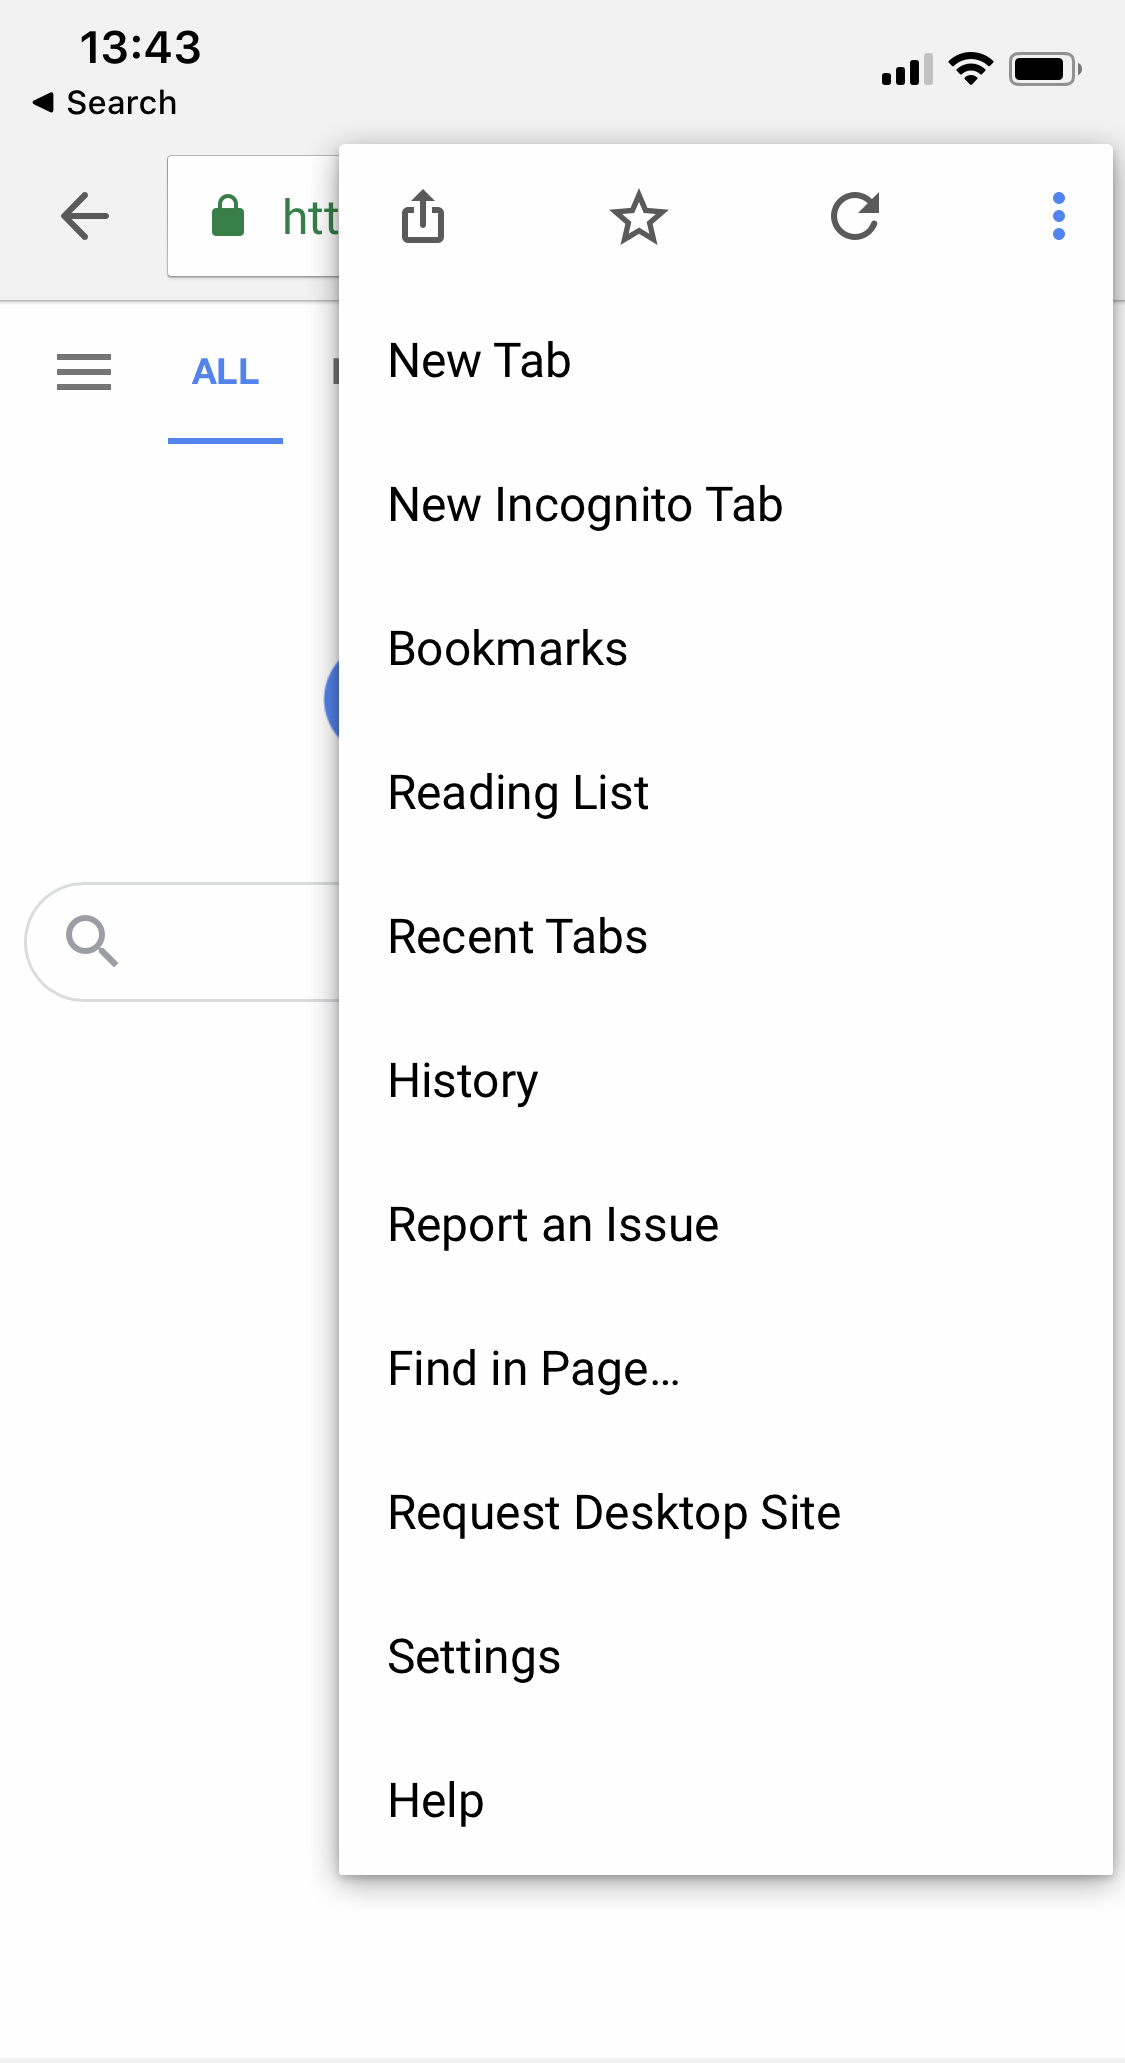 Chrome Image Search options